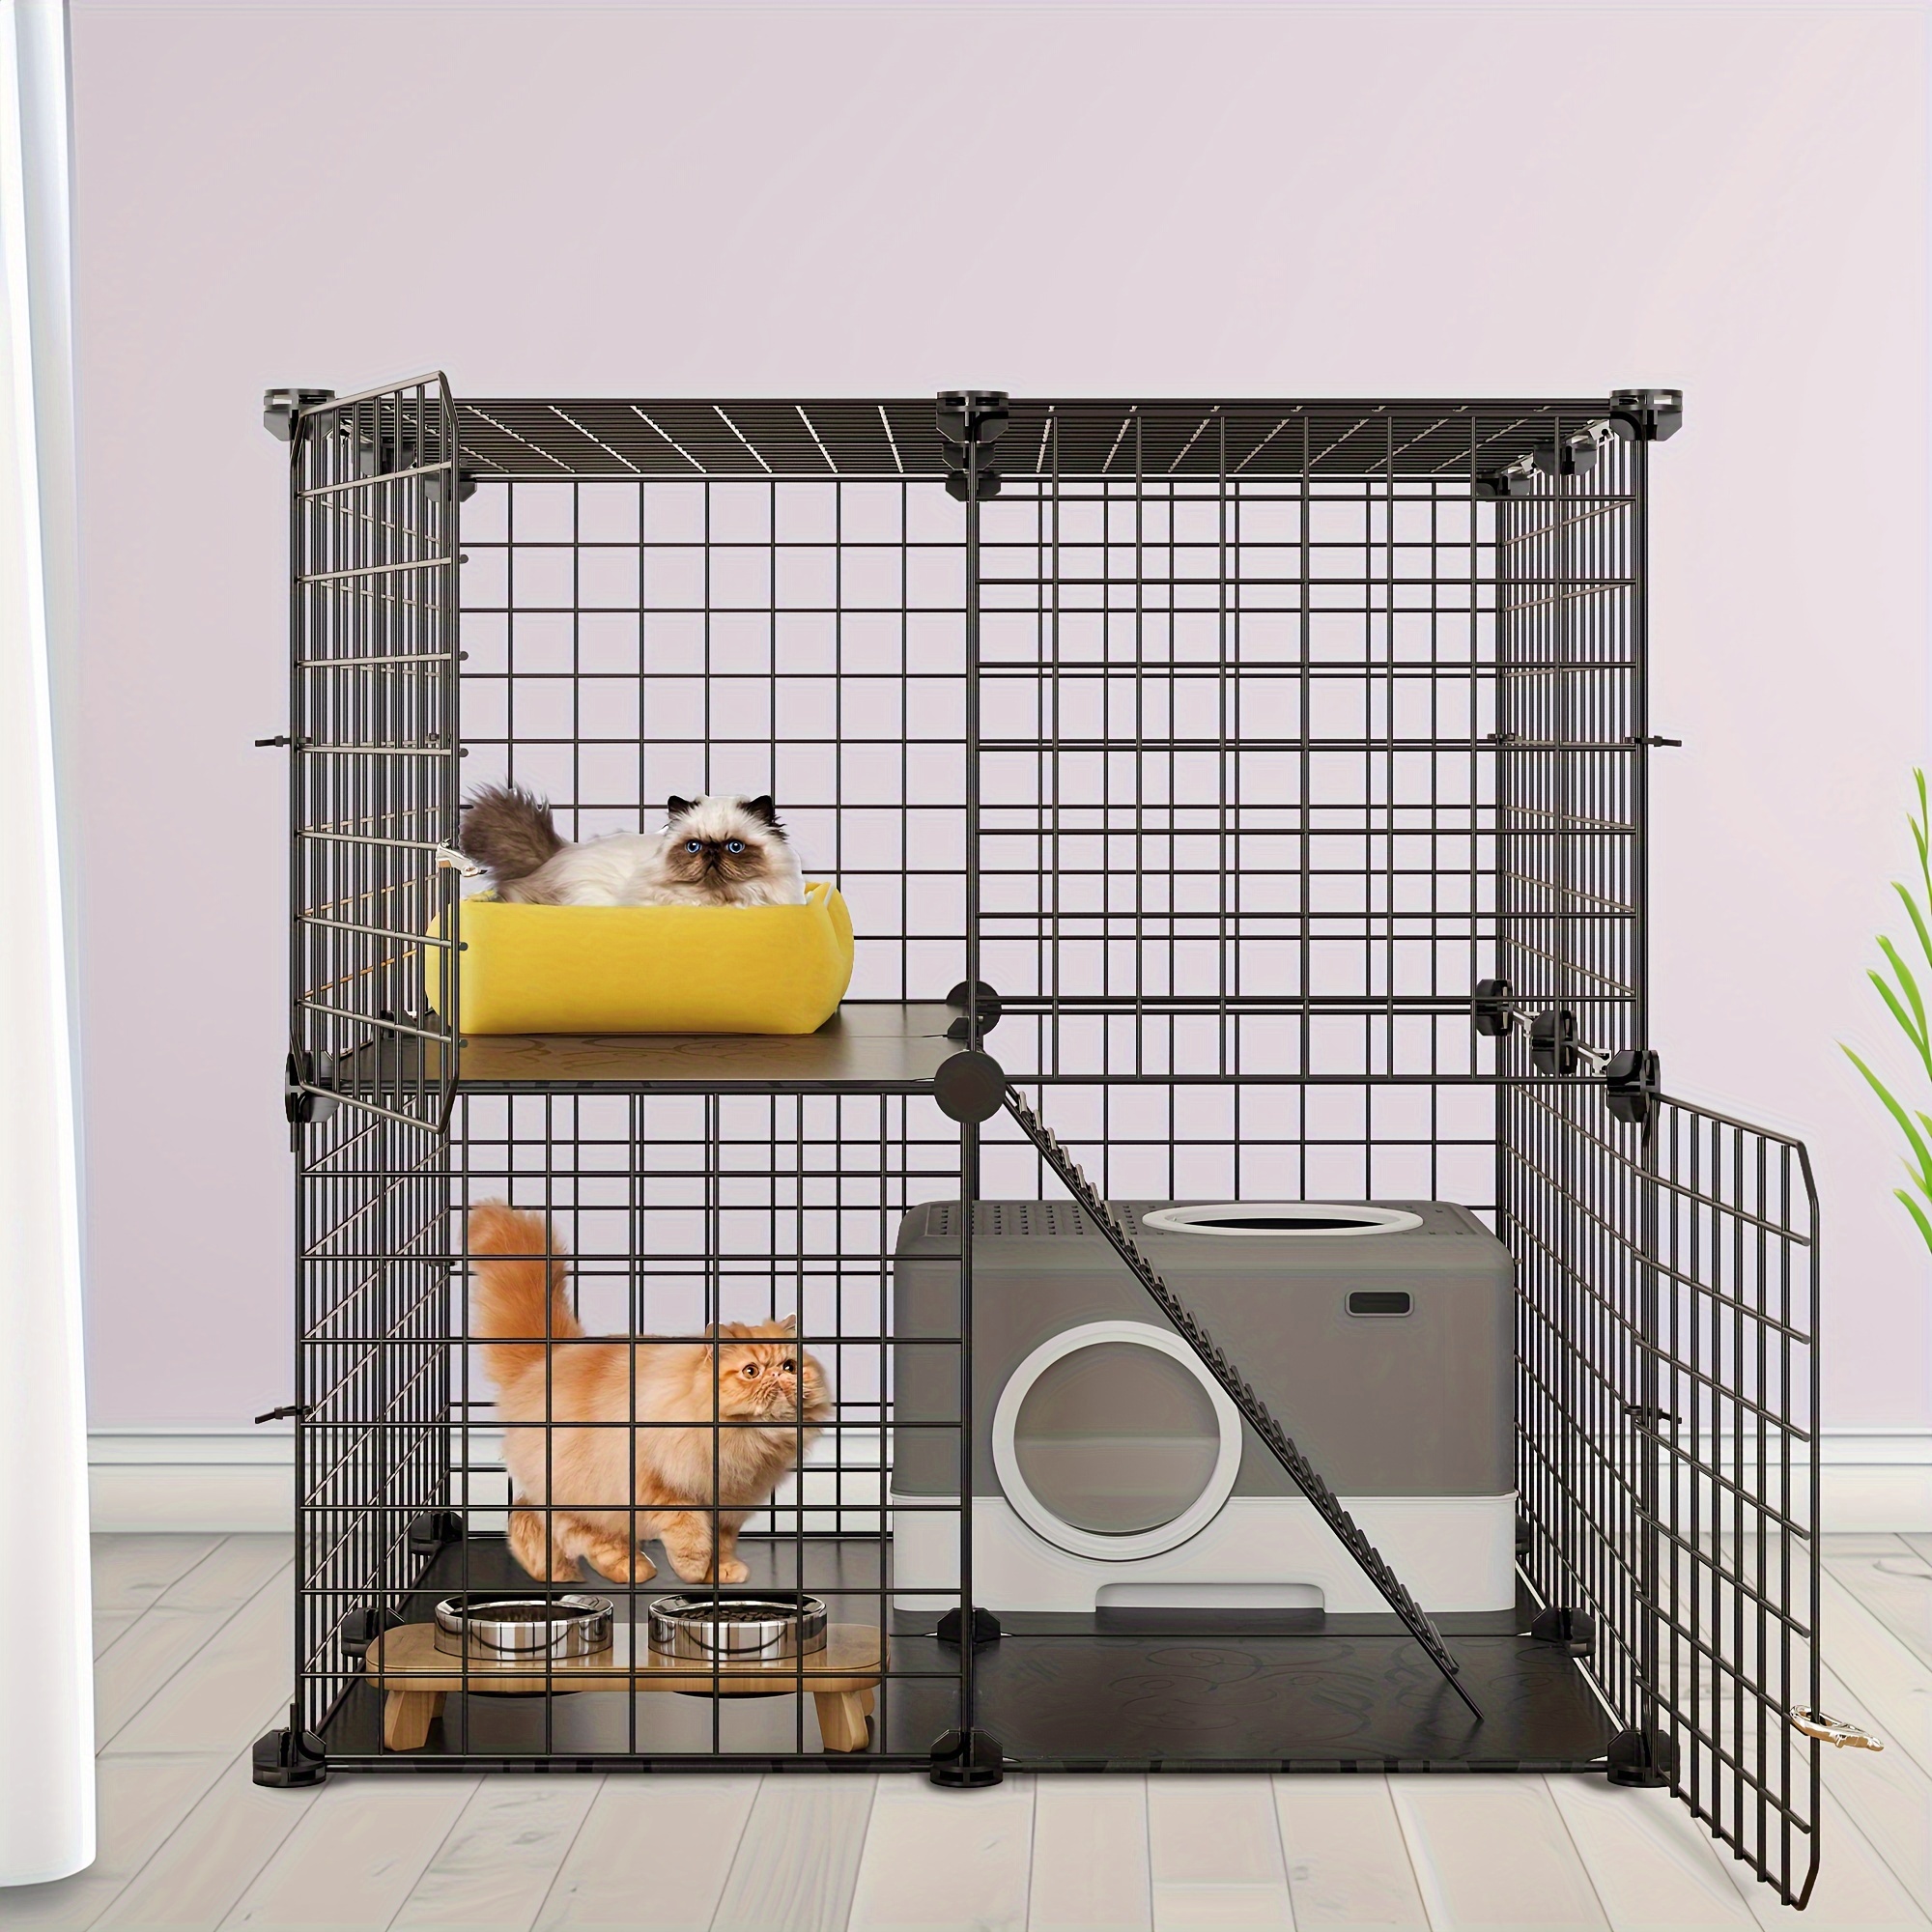 

Yarsca 2 Tier Indoor Cat Enclosures Kitten Cage Diy Pet Playpen Metal Kennel For 1-2 Cats, Ferret, Small Animals, Kitty, Squirrel, Rv Travel, Camping